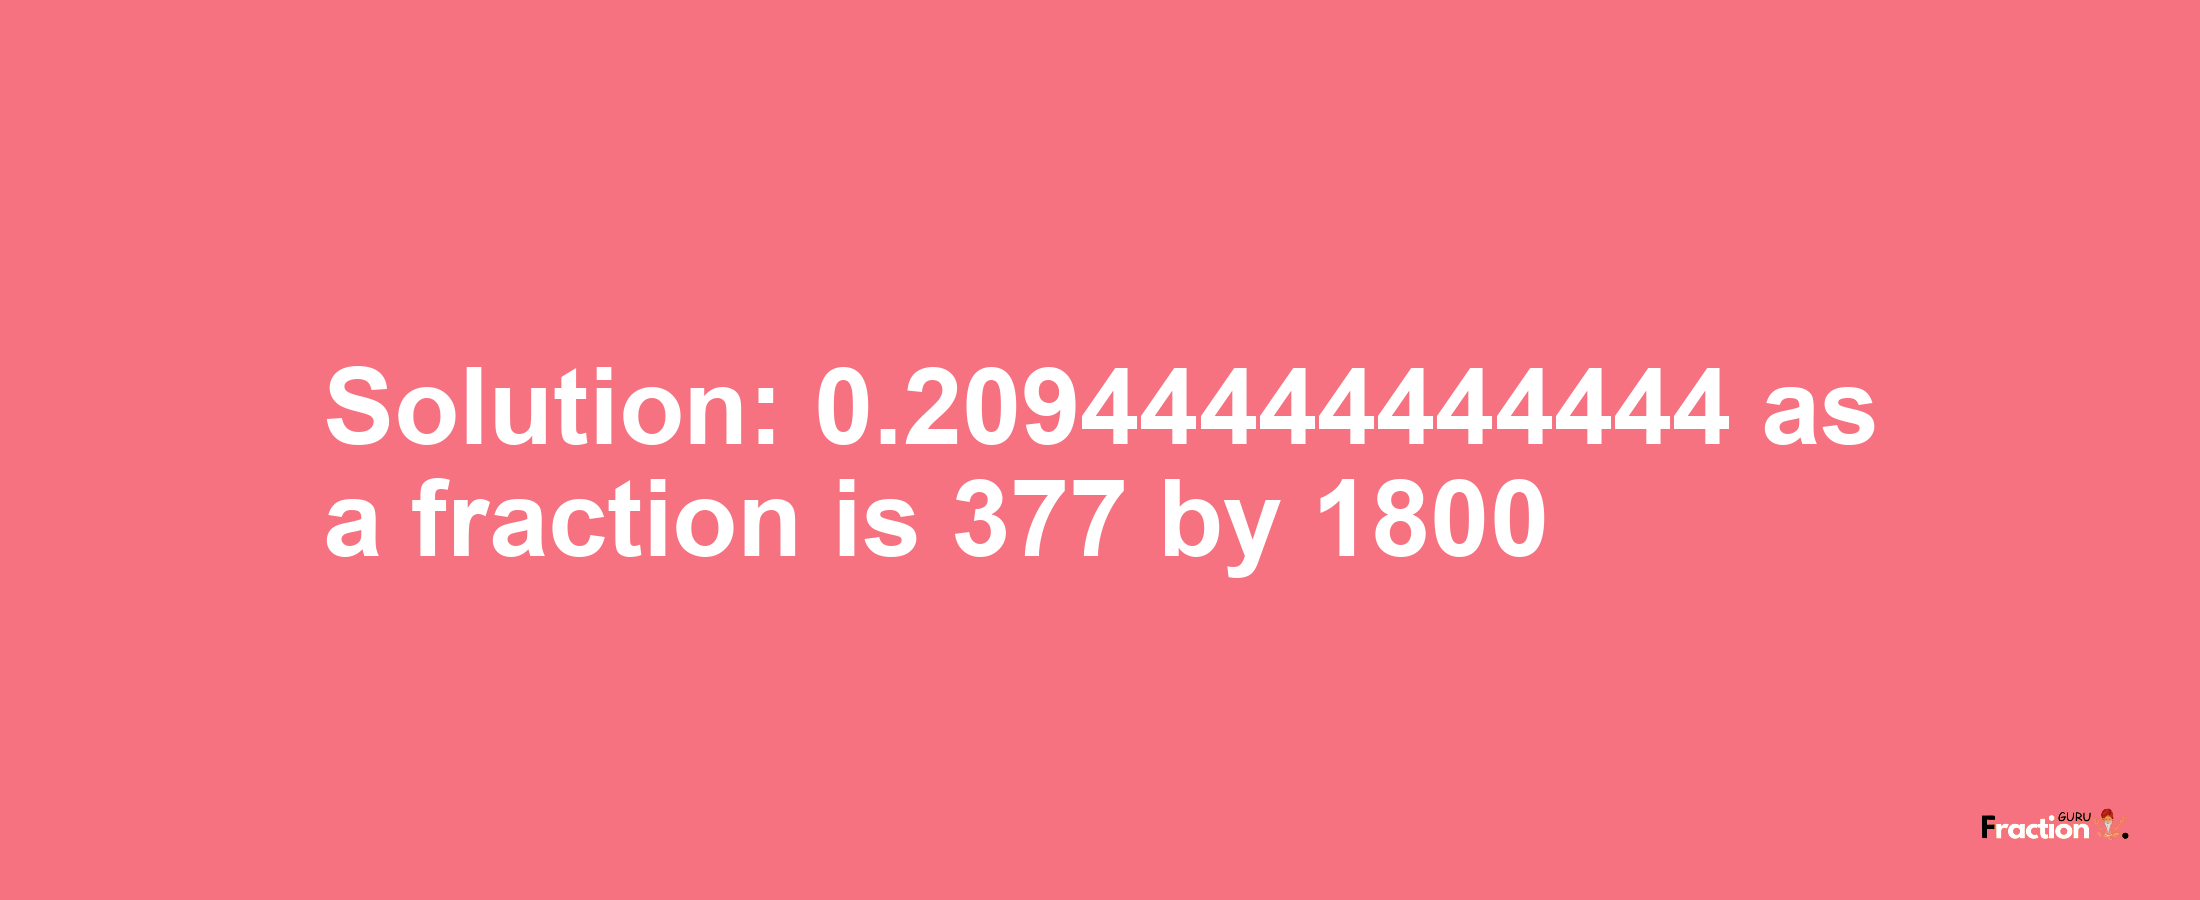 Solution:0.20944444444444 as a fraction is 377/1800